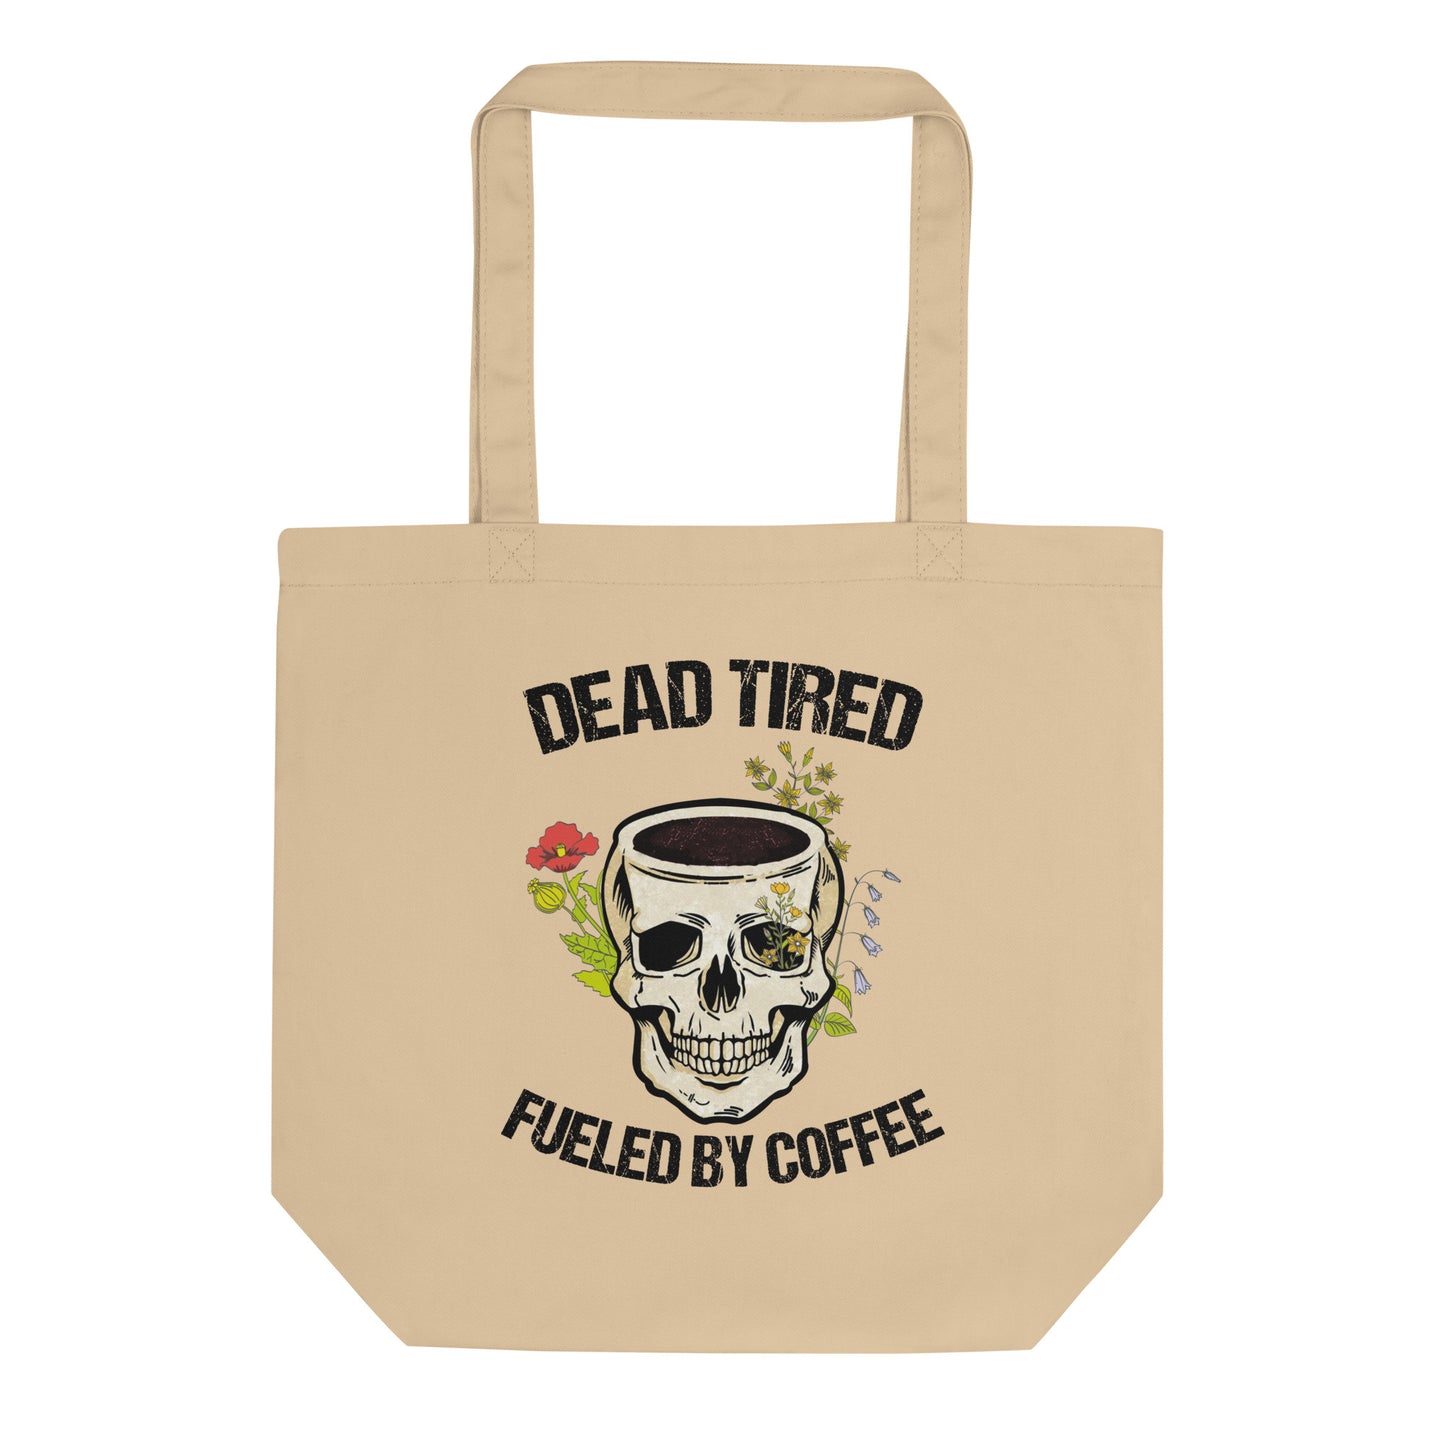 Fueled by Coffee Eco Tote Bag